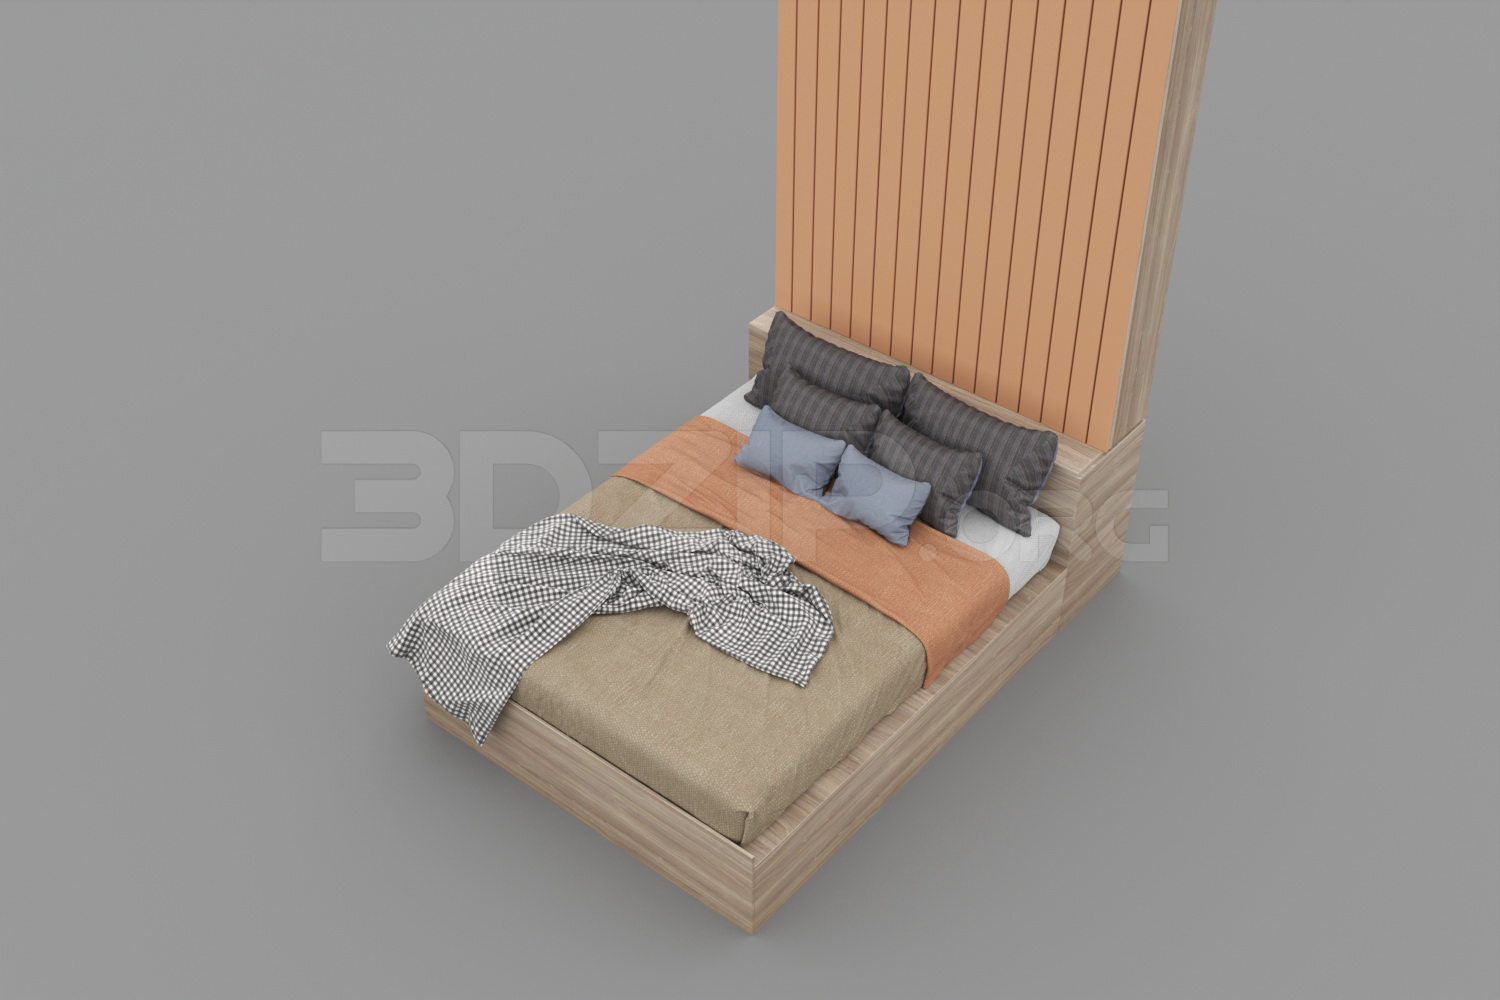 610. Download Free Bed Model By Vuong Chill